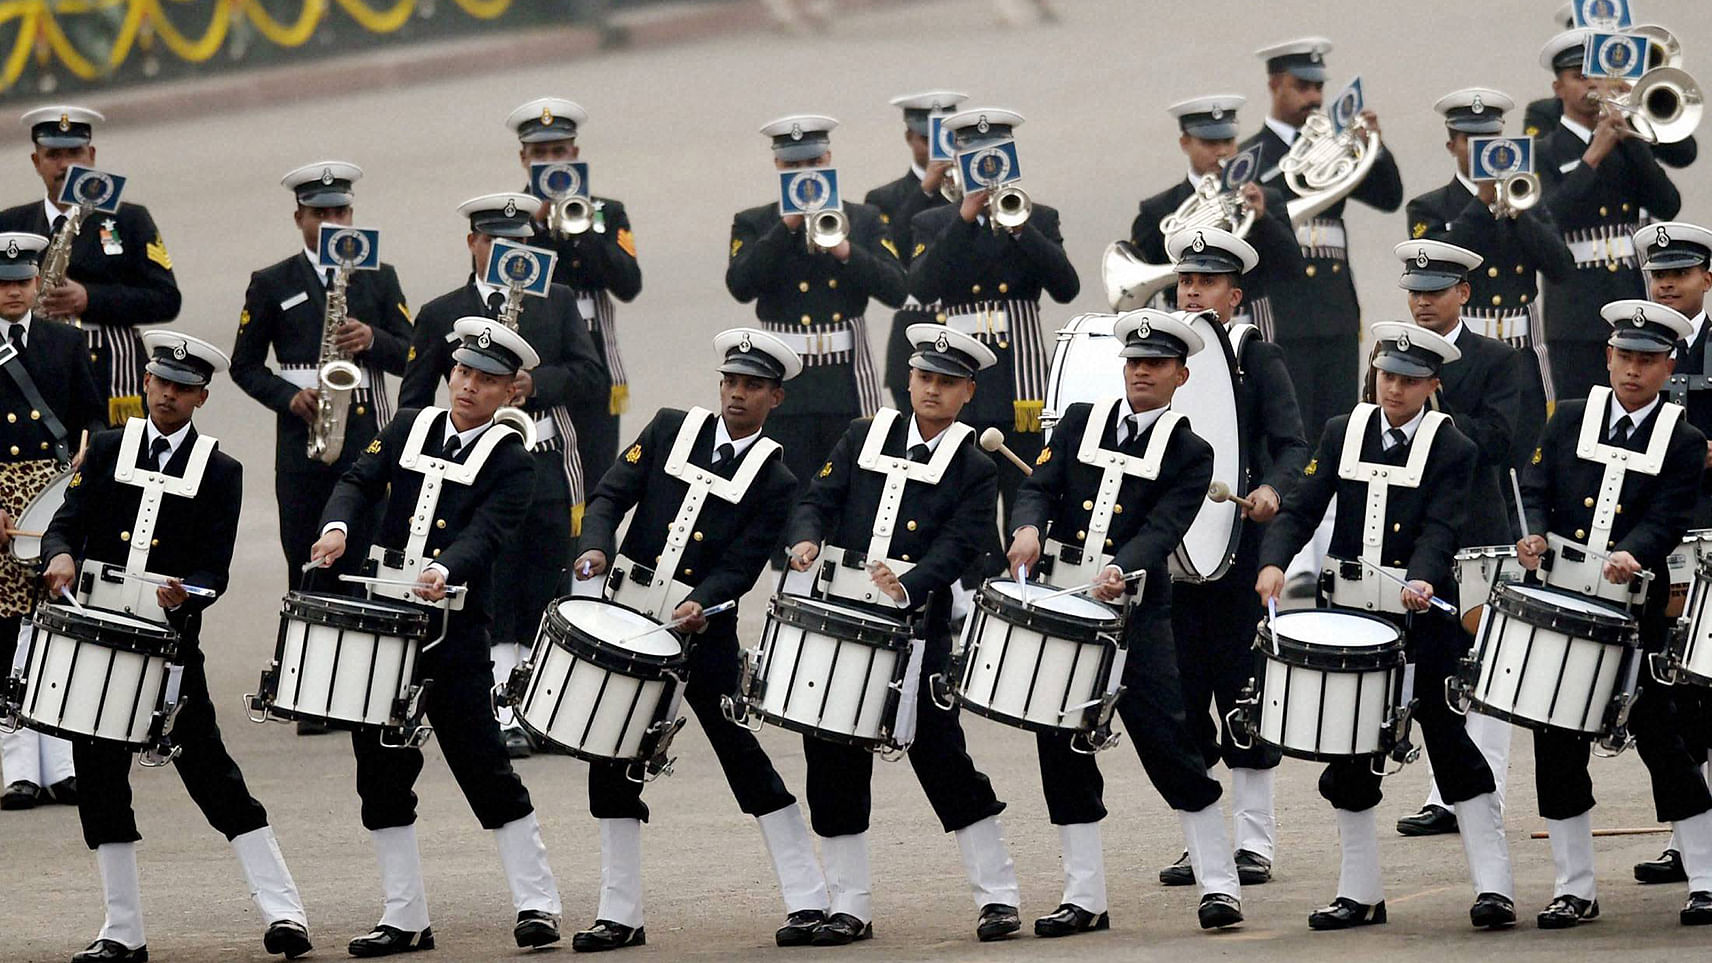 The Naval brass band performs during the Beating Retreat ceremony at Vijay Chowk in New Delhi on Friday. (Photo: PTI)